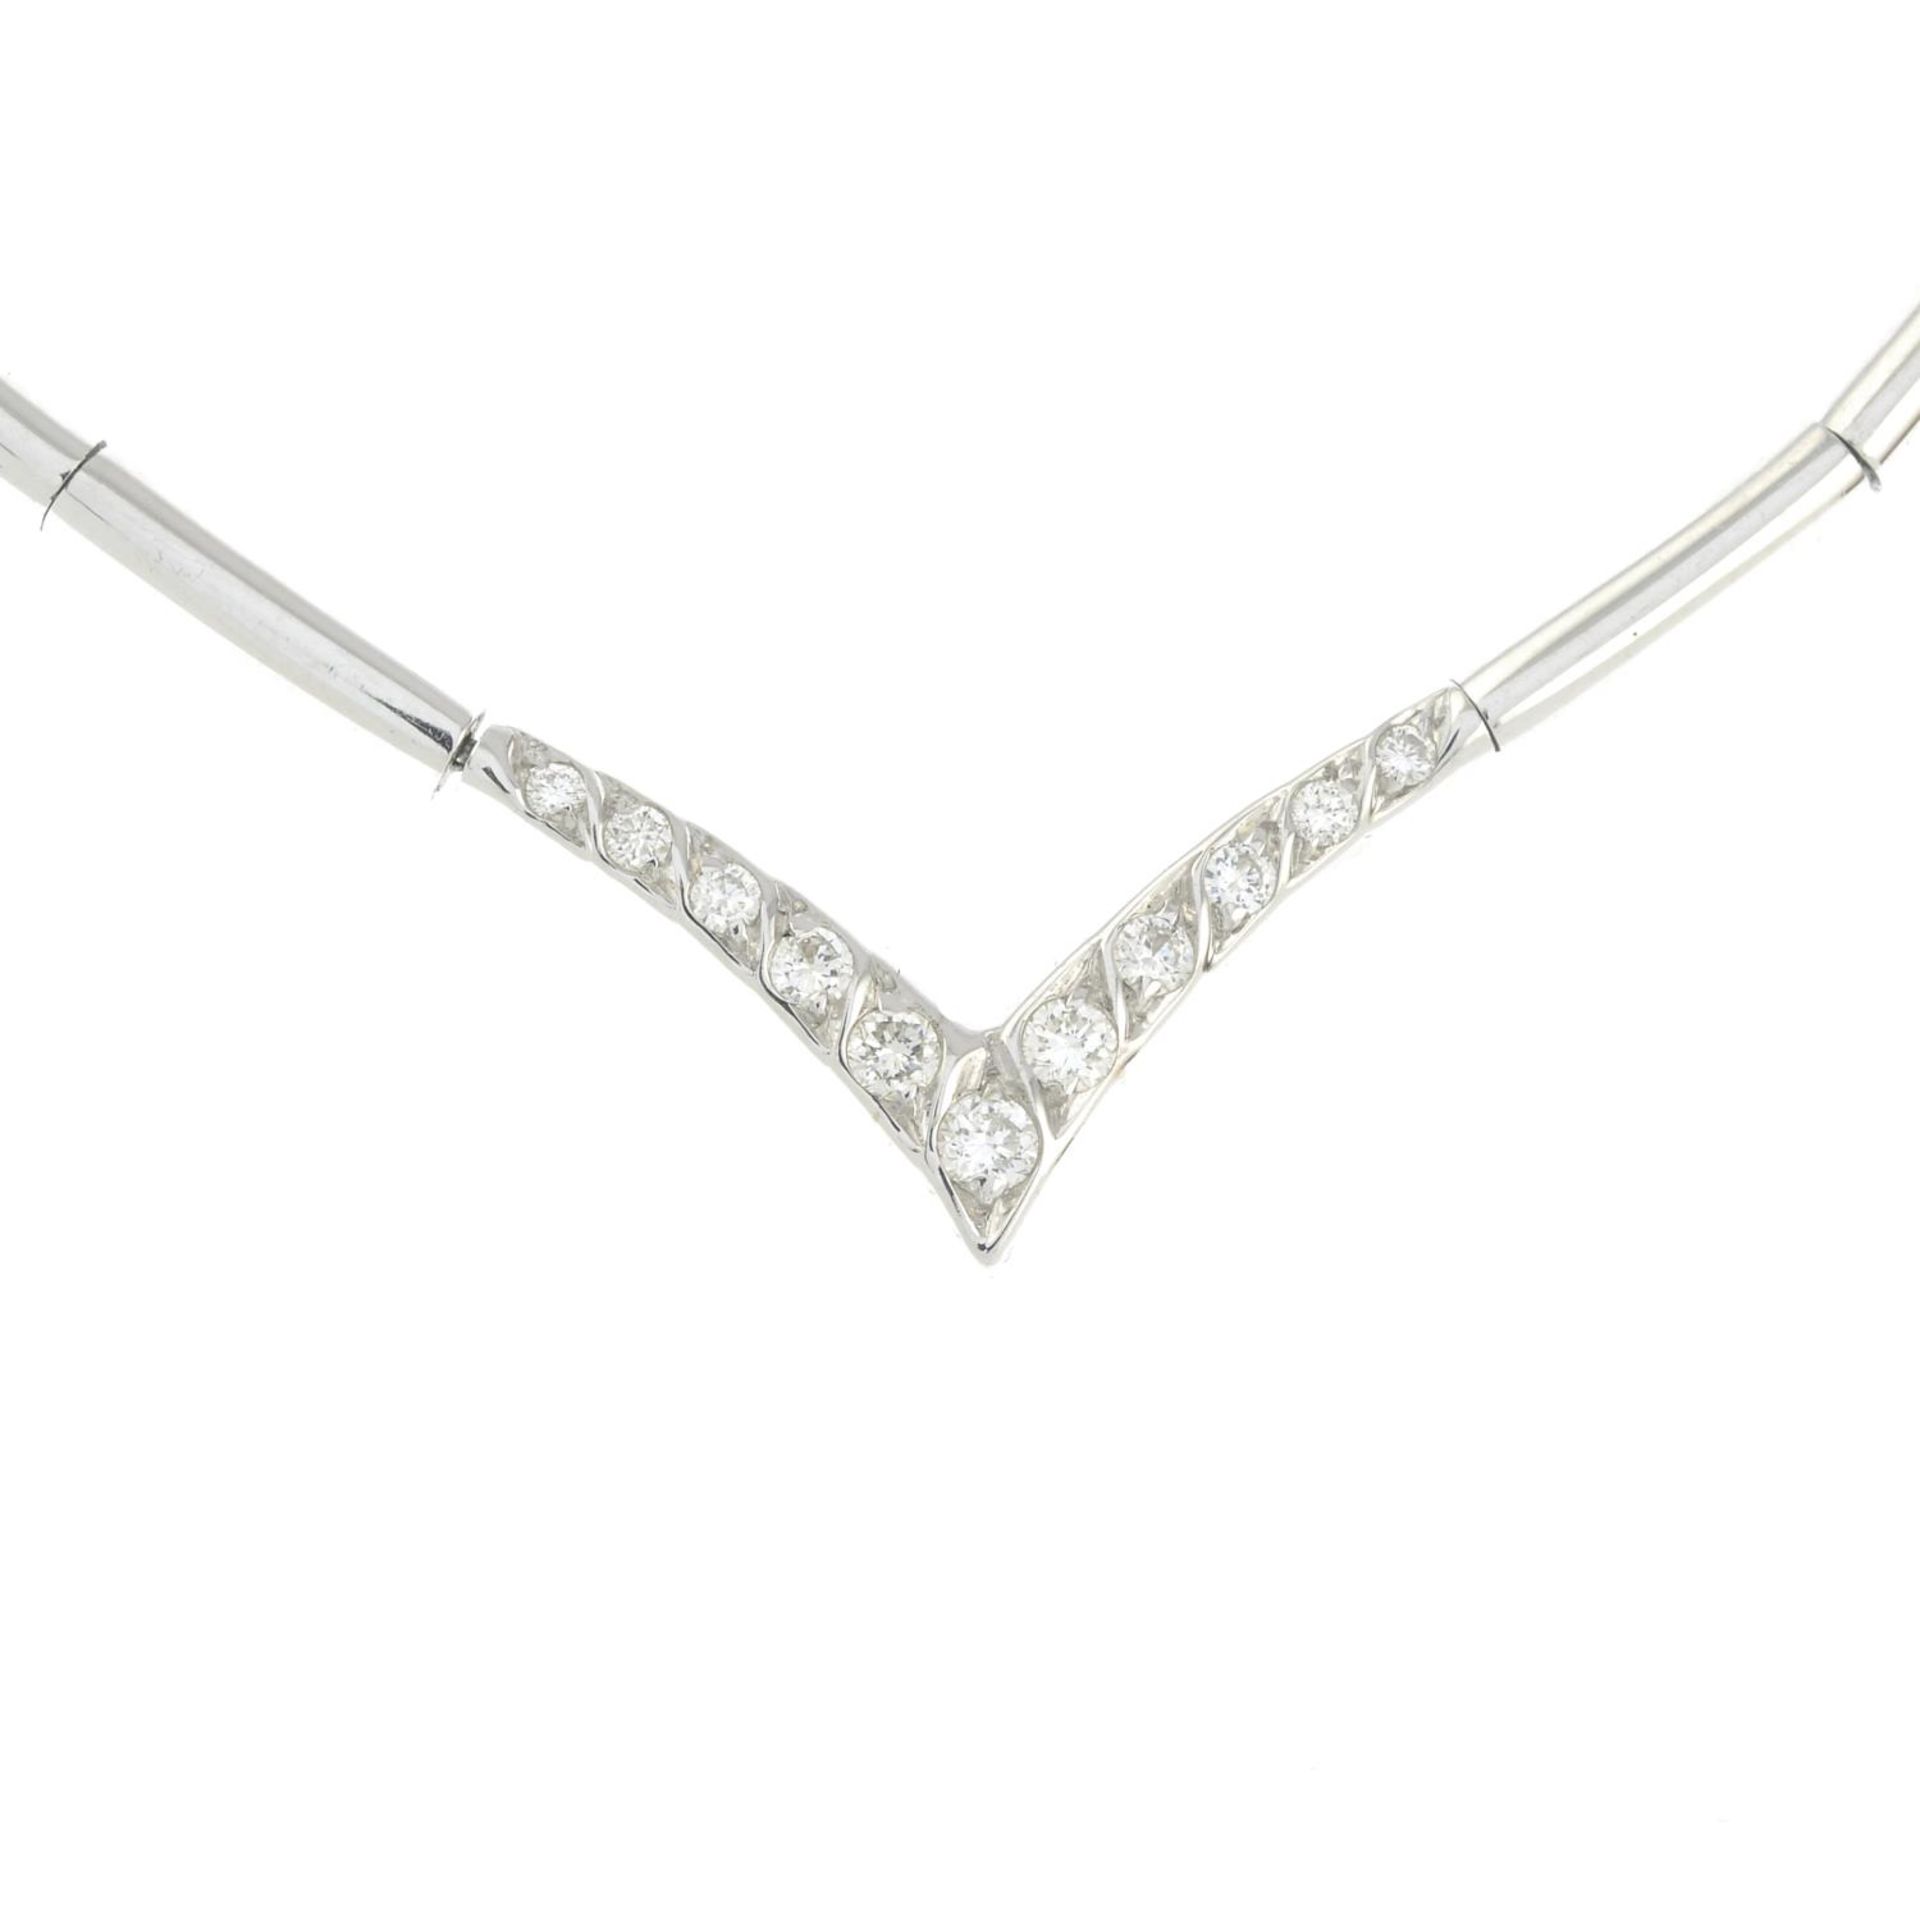 A collar, with brilliant-cut diamond highlights.Total diamond weight 0.24ct,